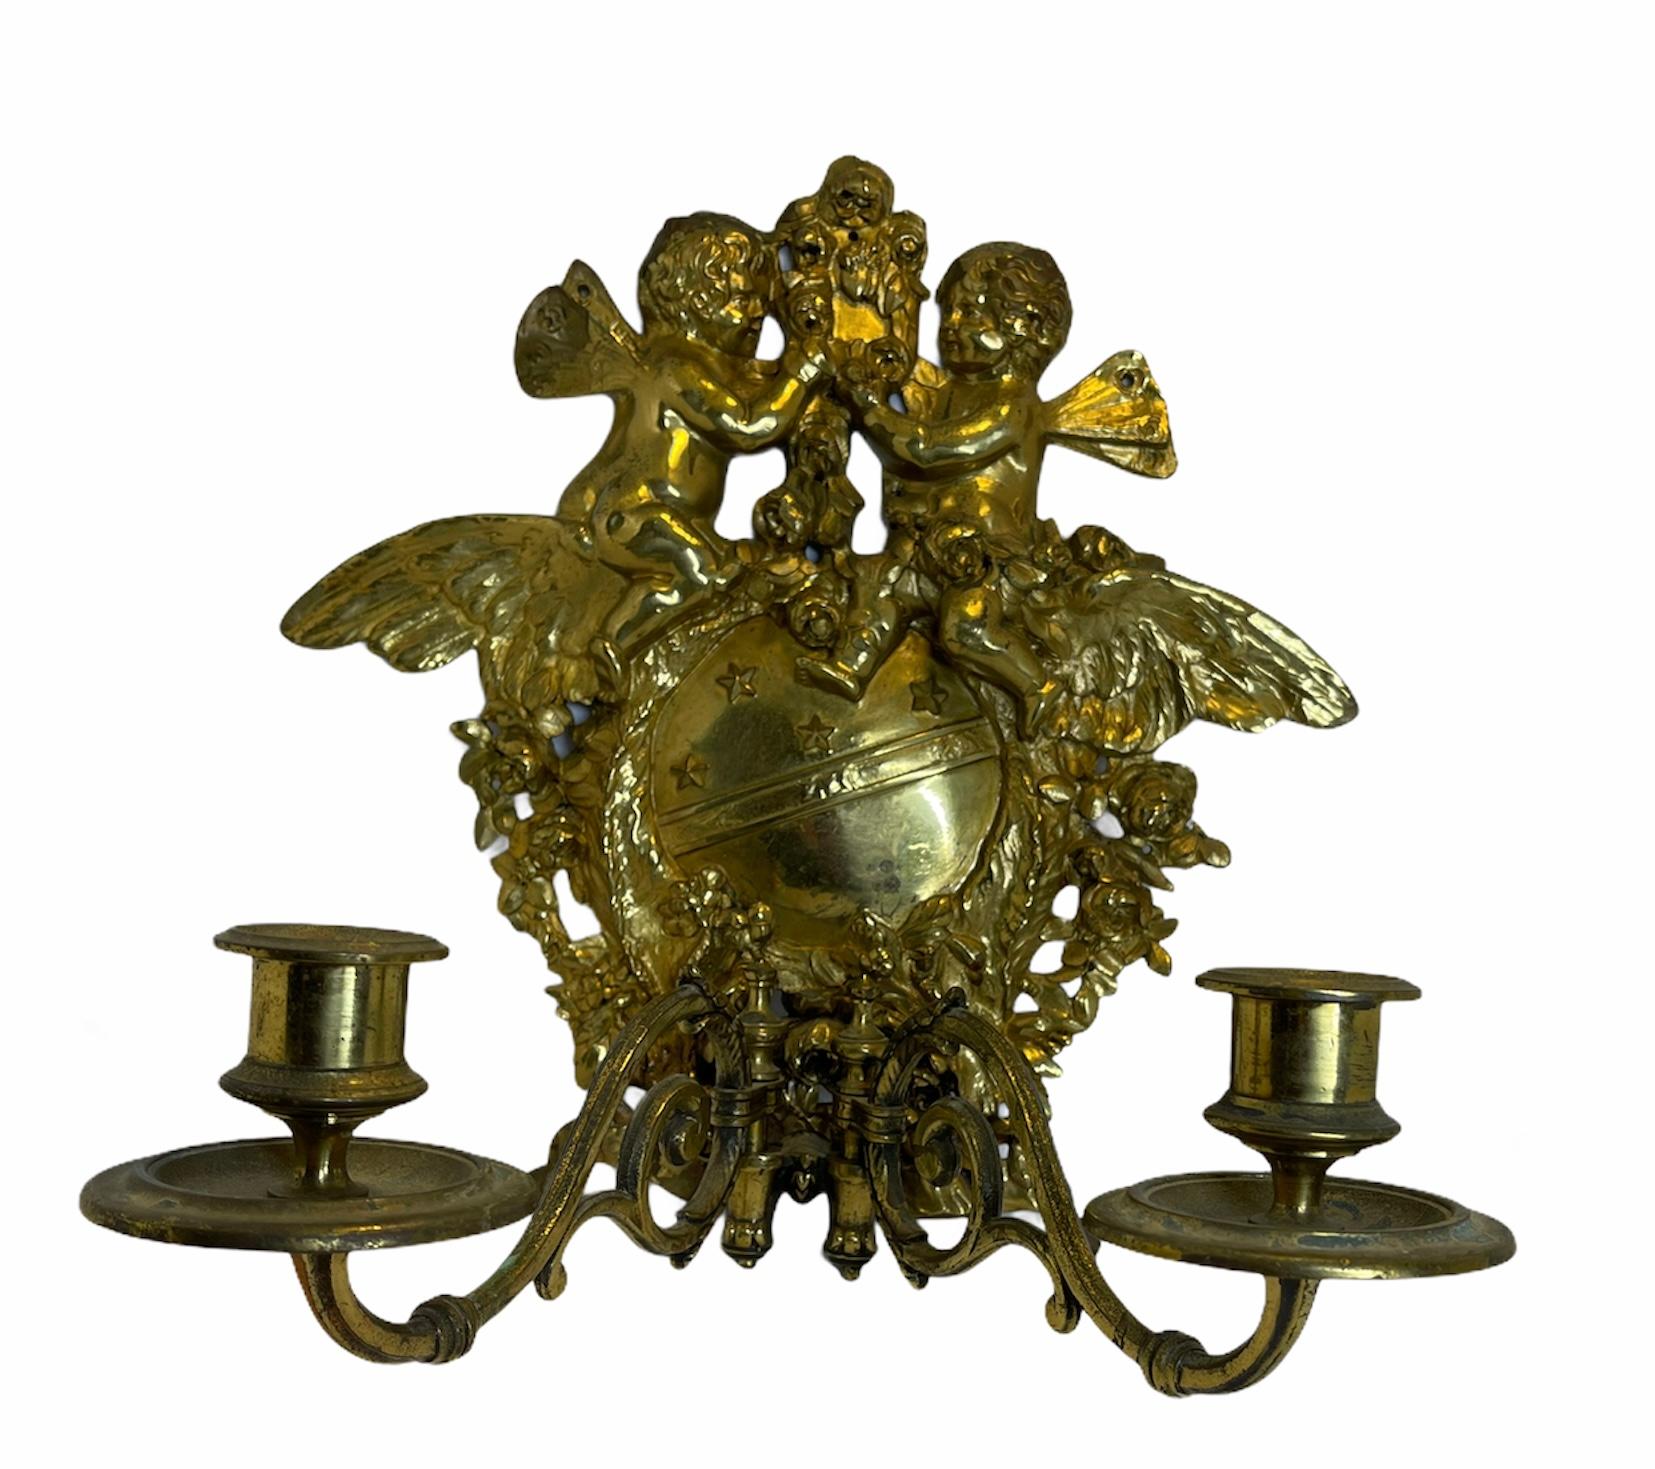 Bronze Cherub Wall Sconce or Wall Candleholder In Good Condition For Sale In Guaynabo, PR